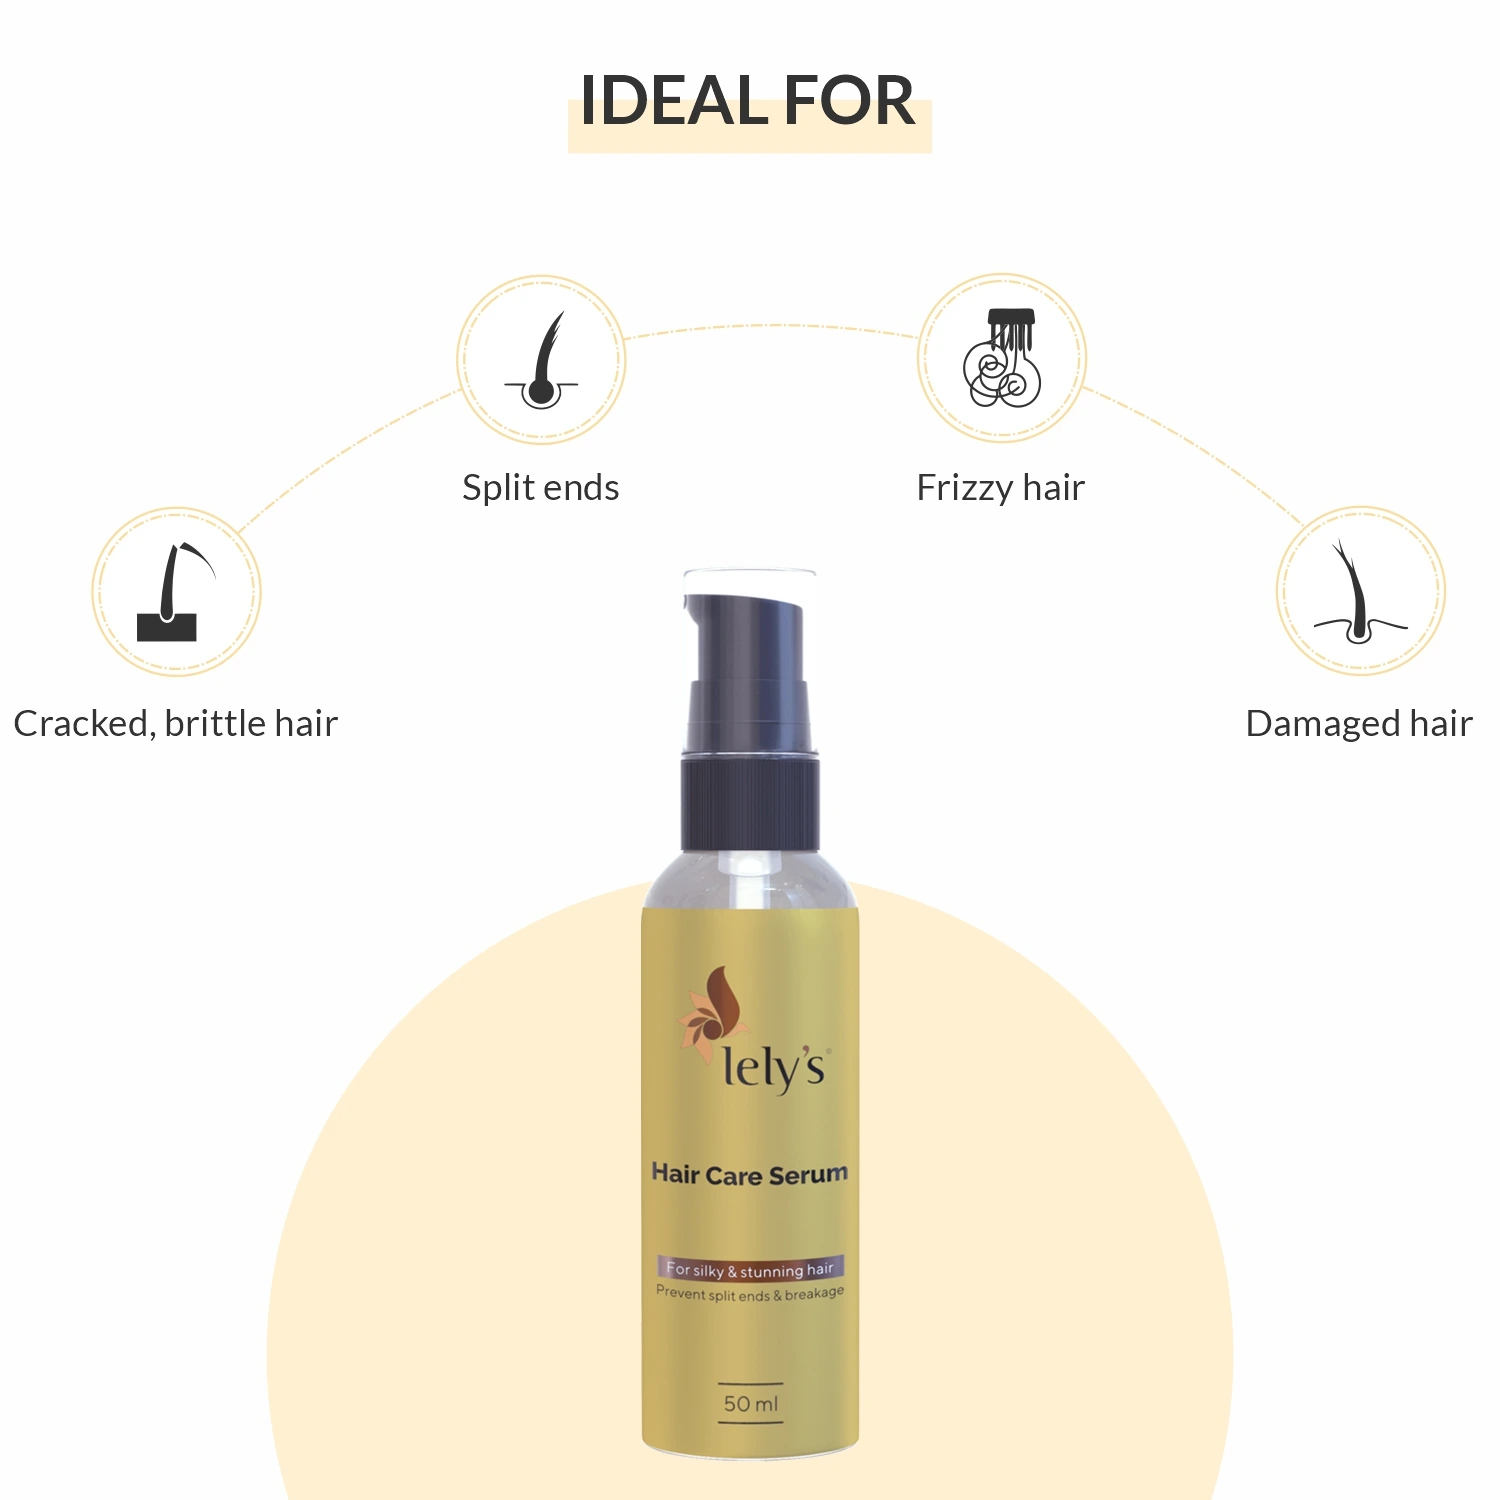 Ideal for - Hair Care Serum